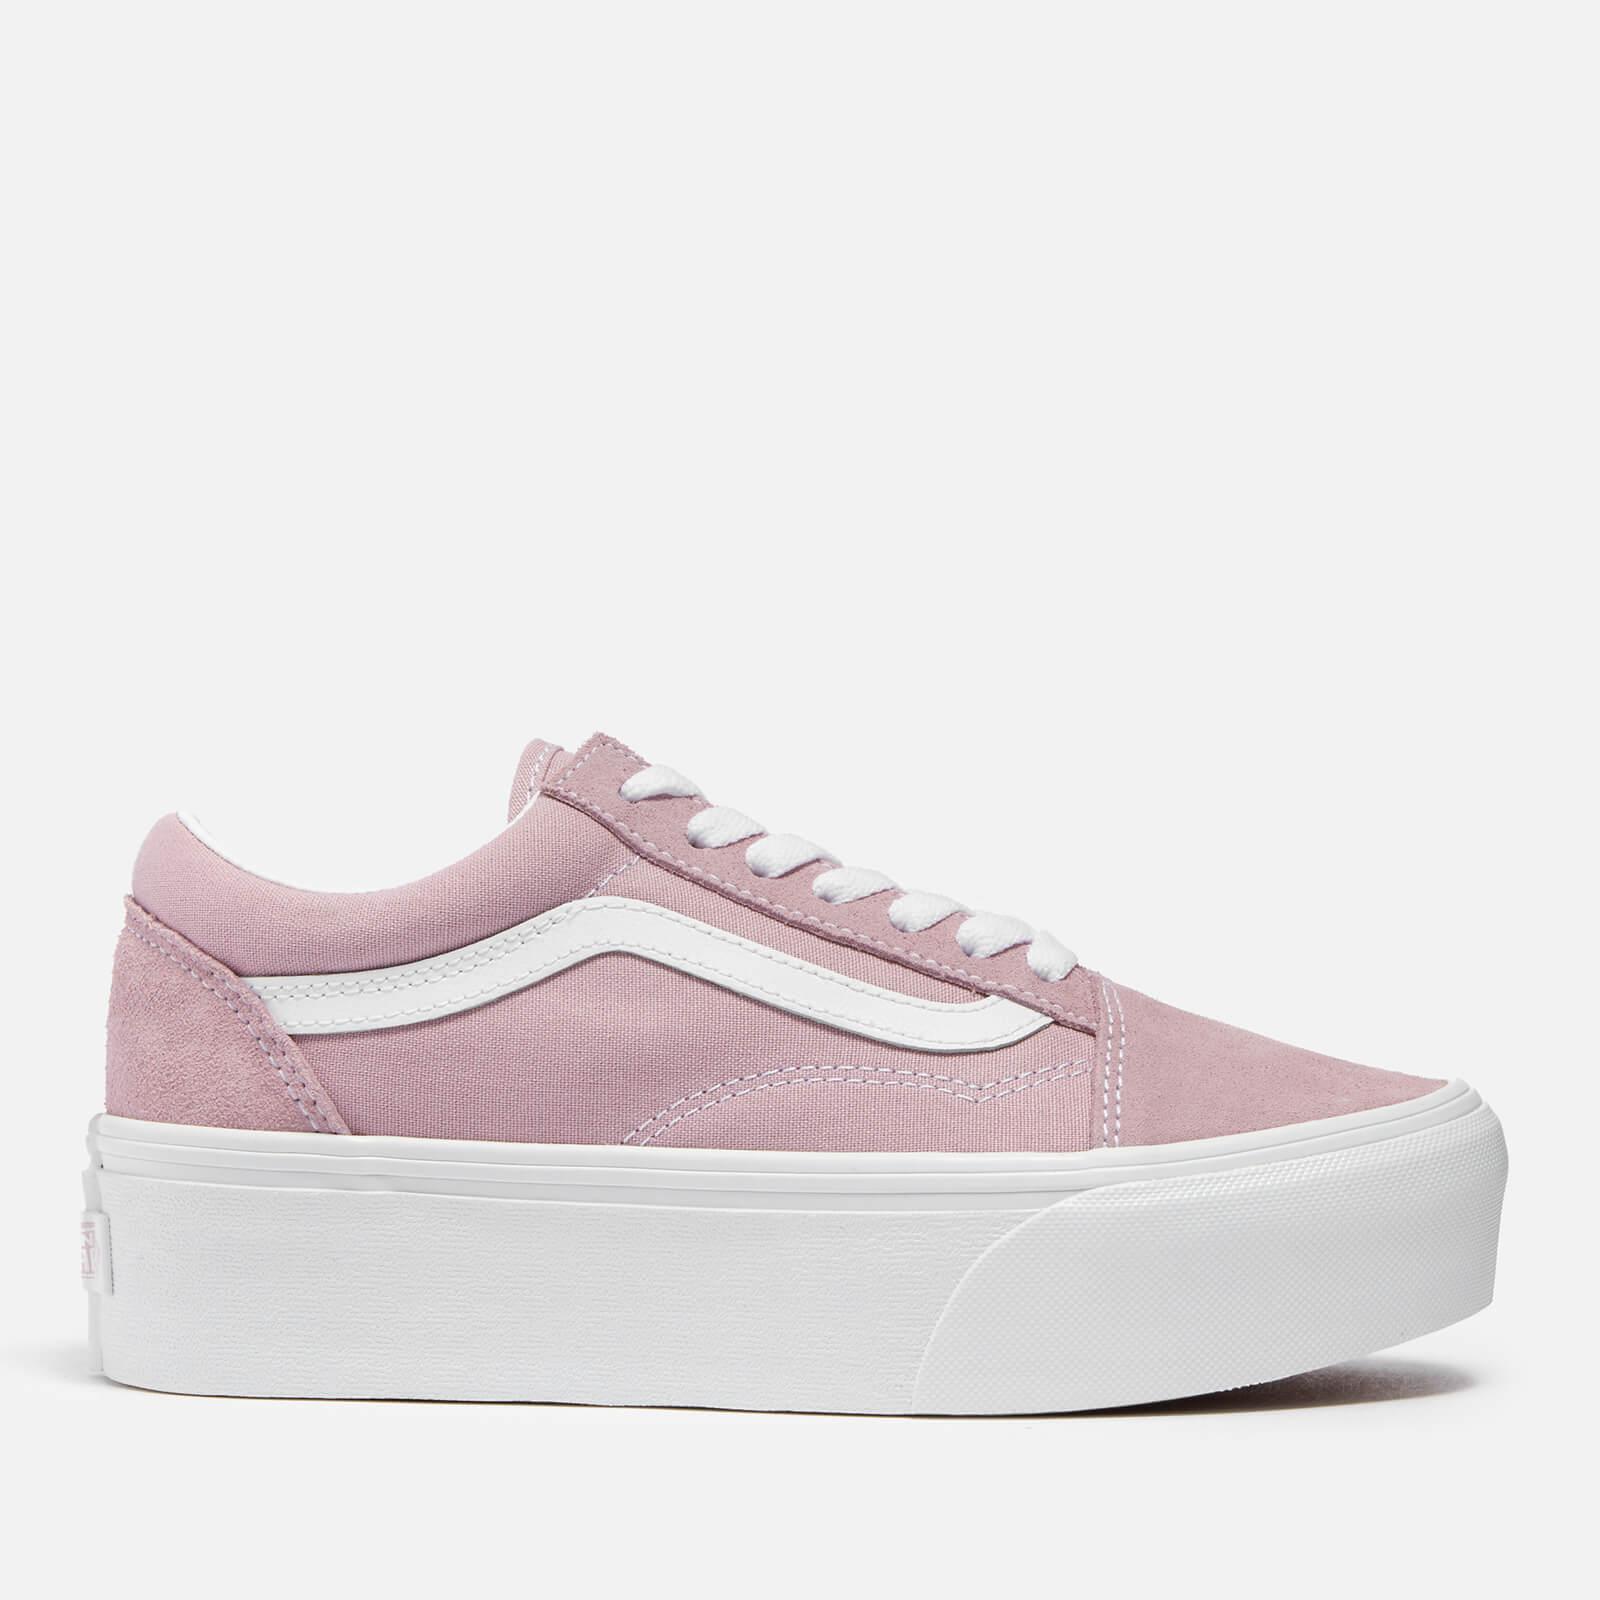 Vans Old Skool Stackform Suede And Canvas Trainers in Pink | Lyst